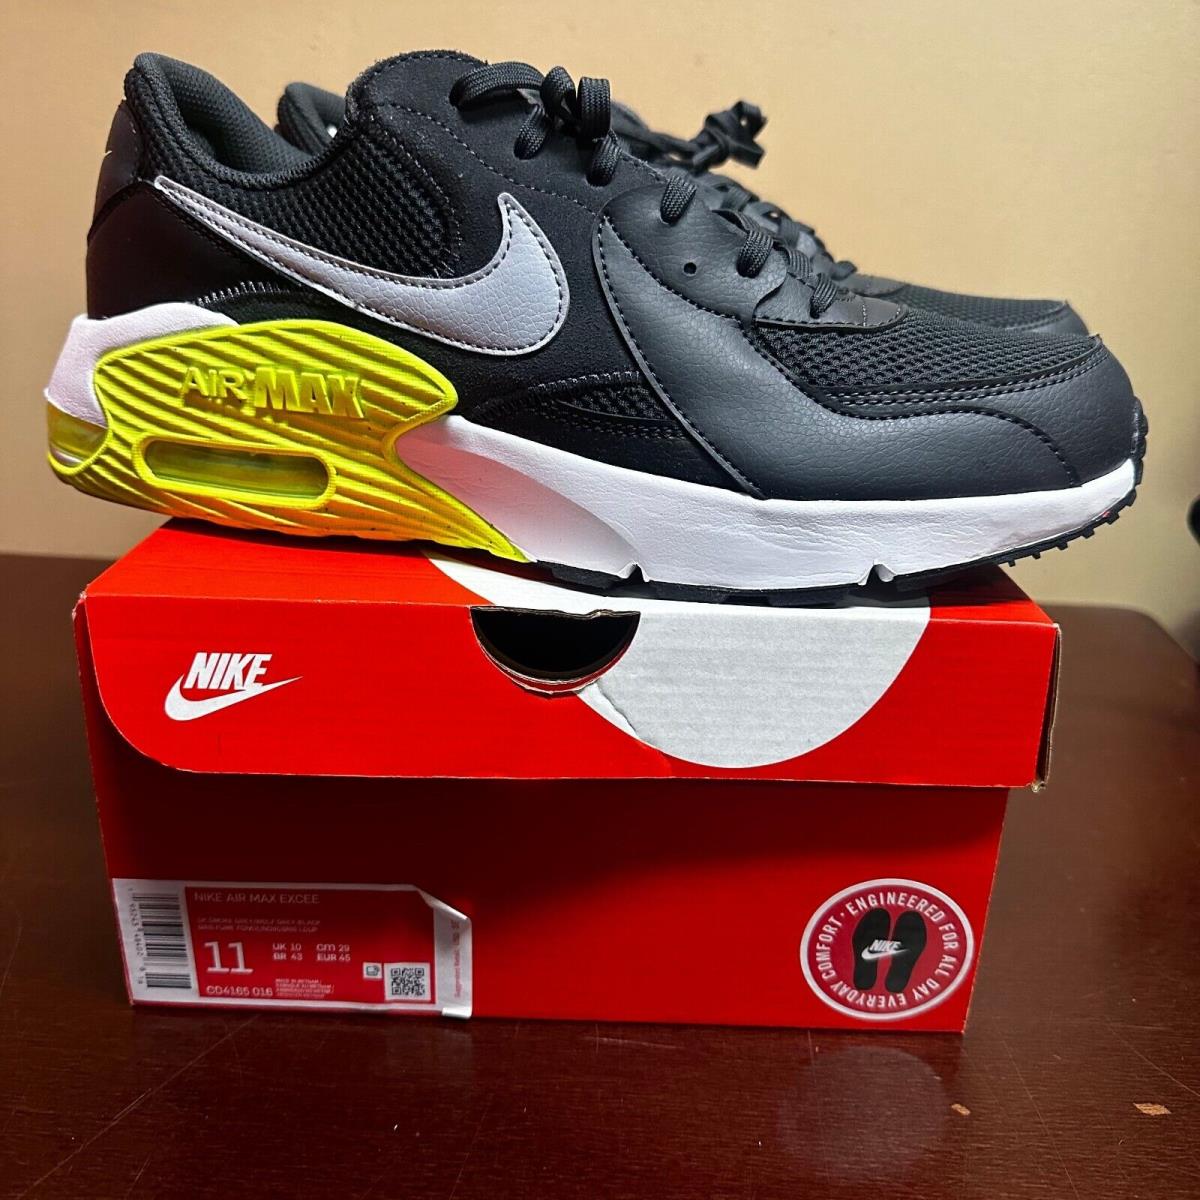 Nike shoes Air Max Excee - Gray, Black 0